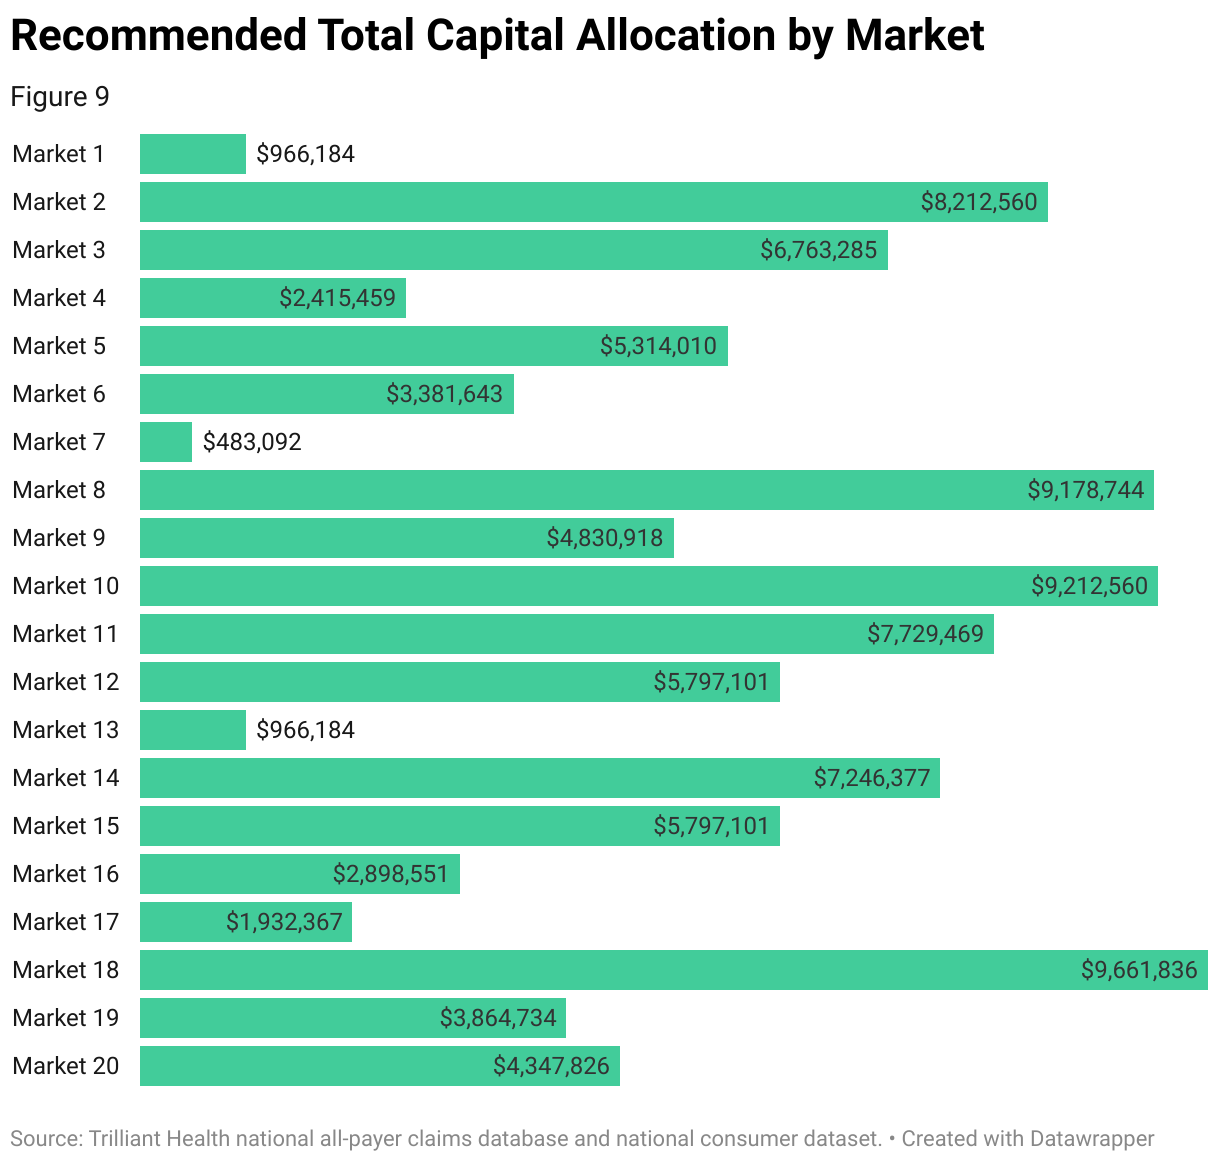 A bar chart that recommends the distribution of capital across 20 markets